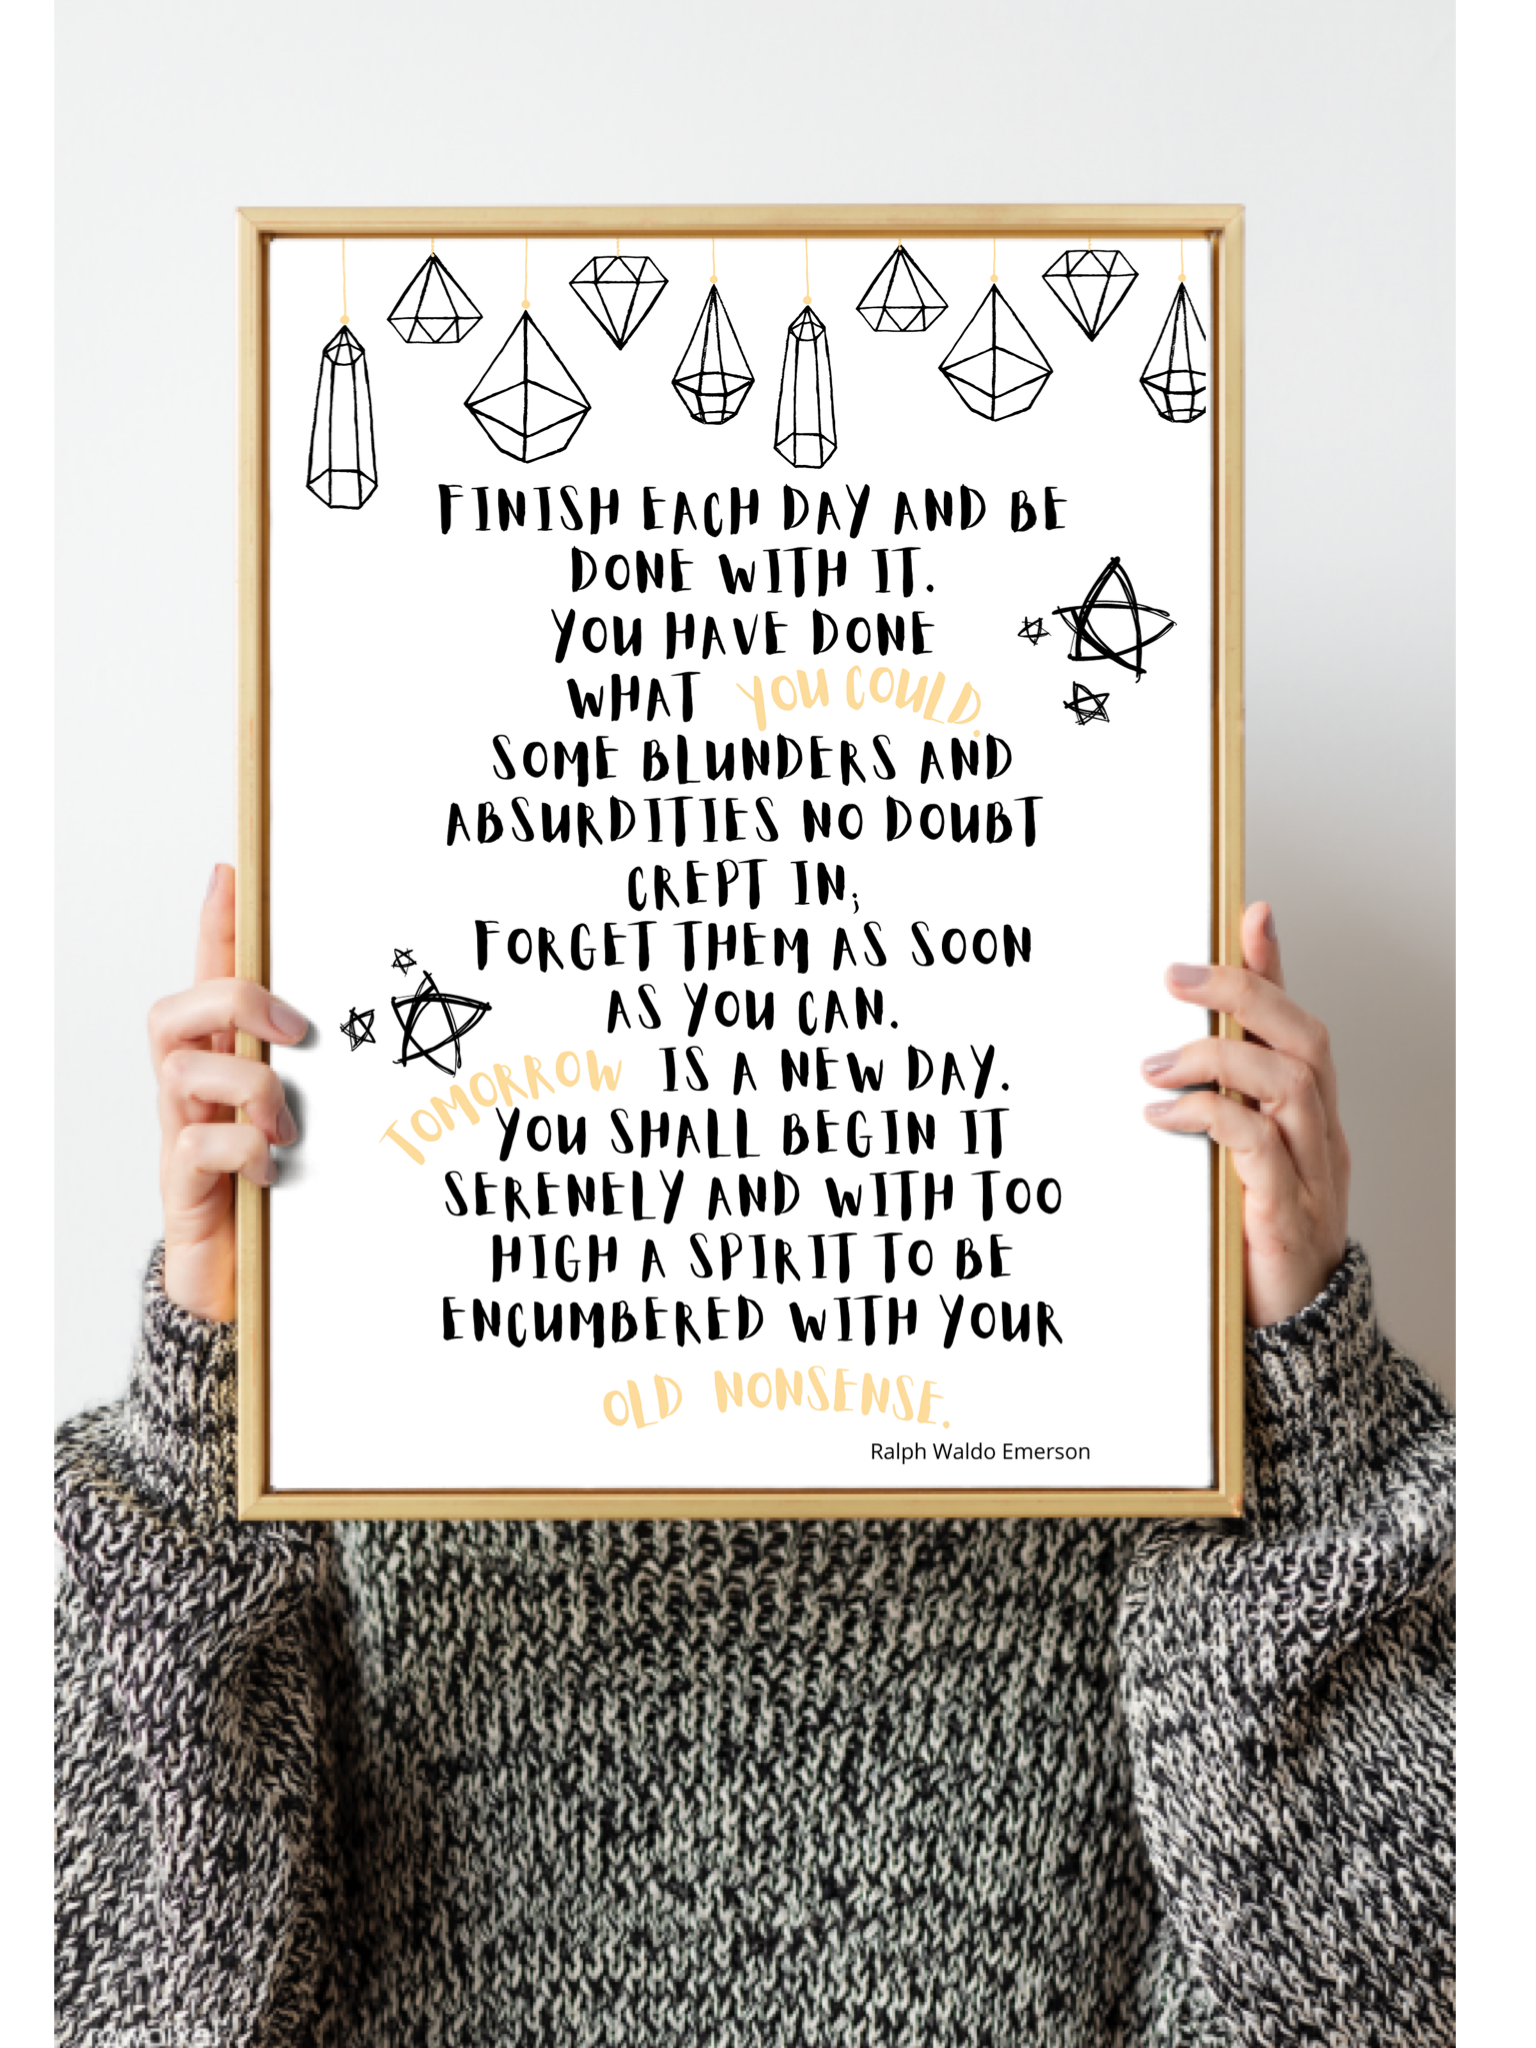 Tomorrow is a new day. Ralph Waldo Emerson positivity quote print available A5, A4 and A3